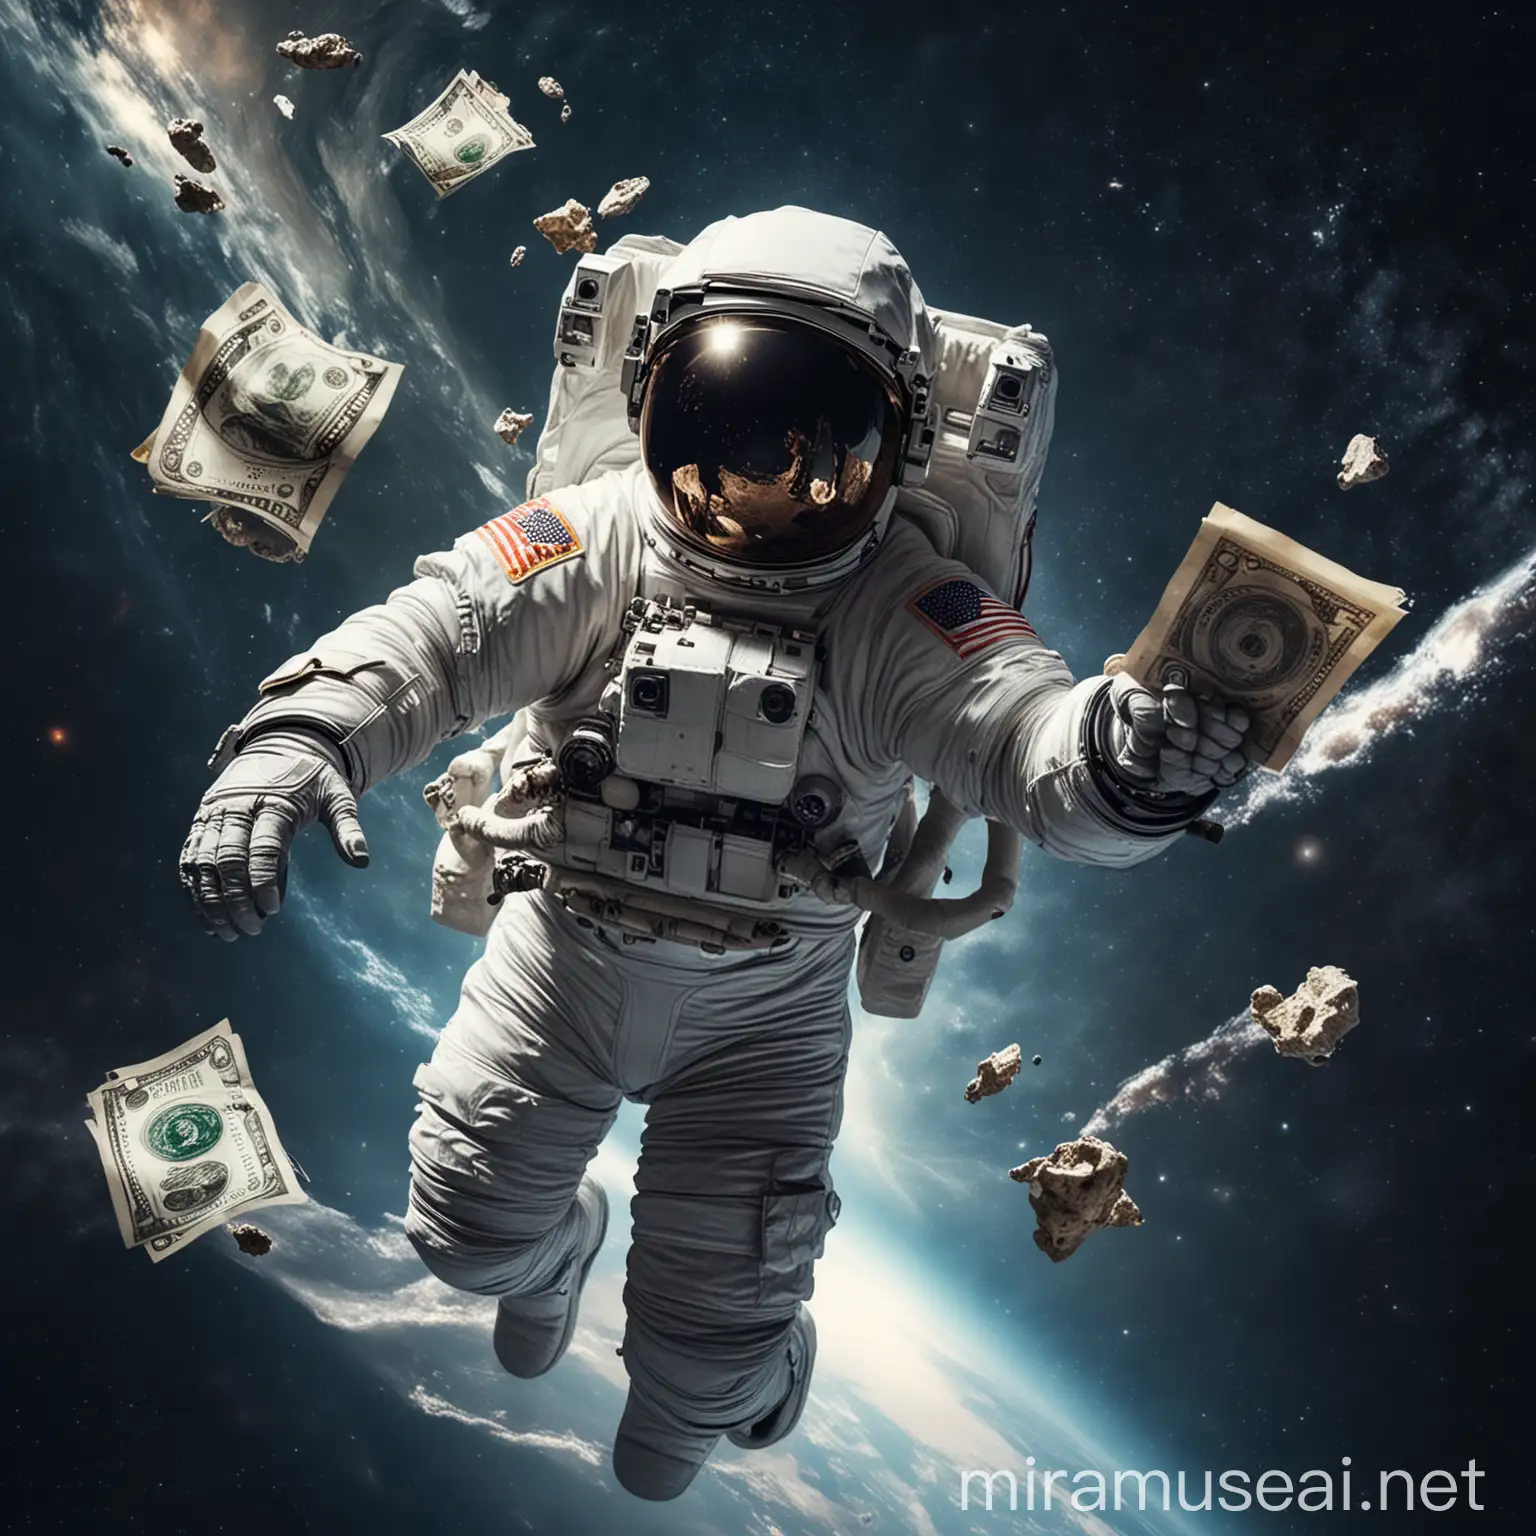 Astronaut Holding Wealth in the Vastness of Space